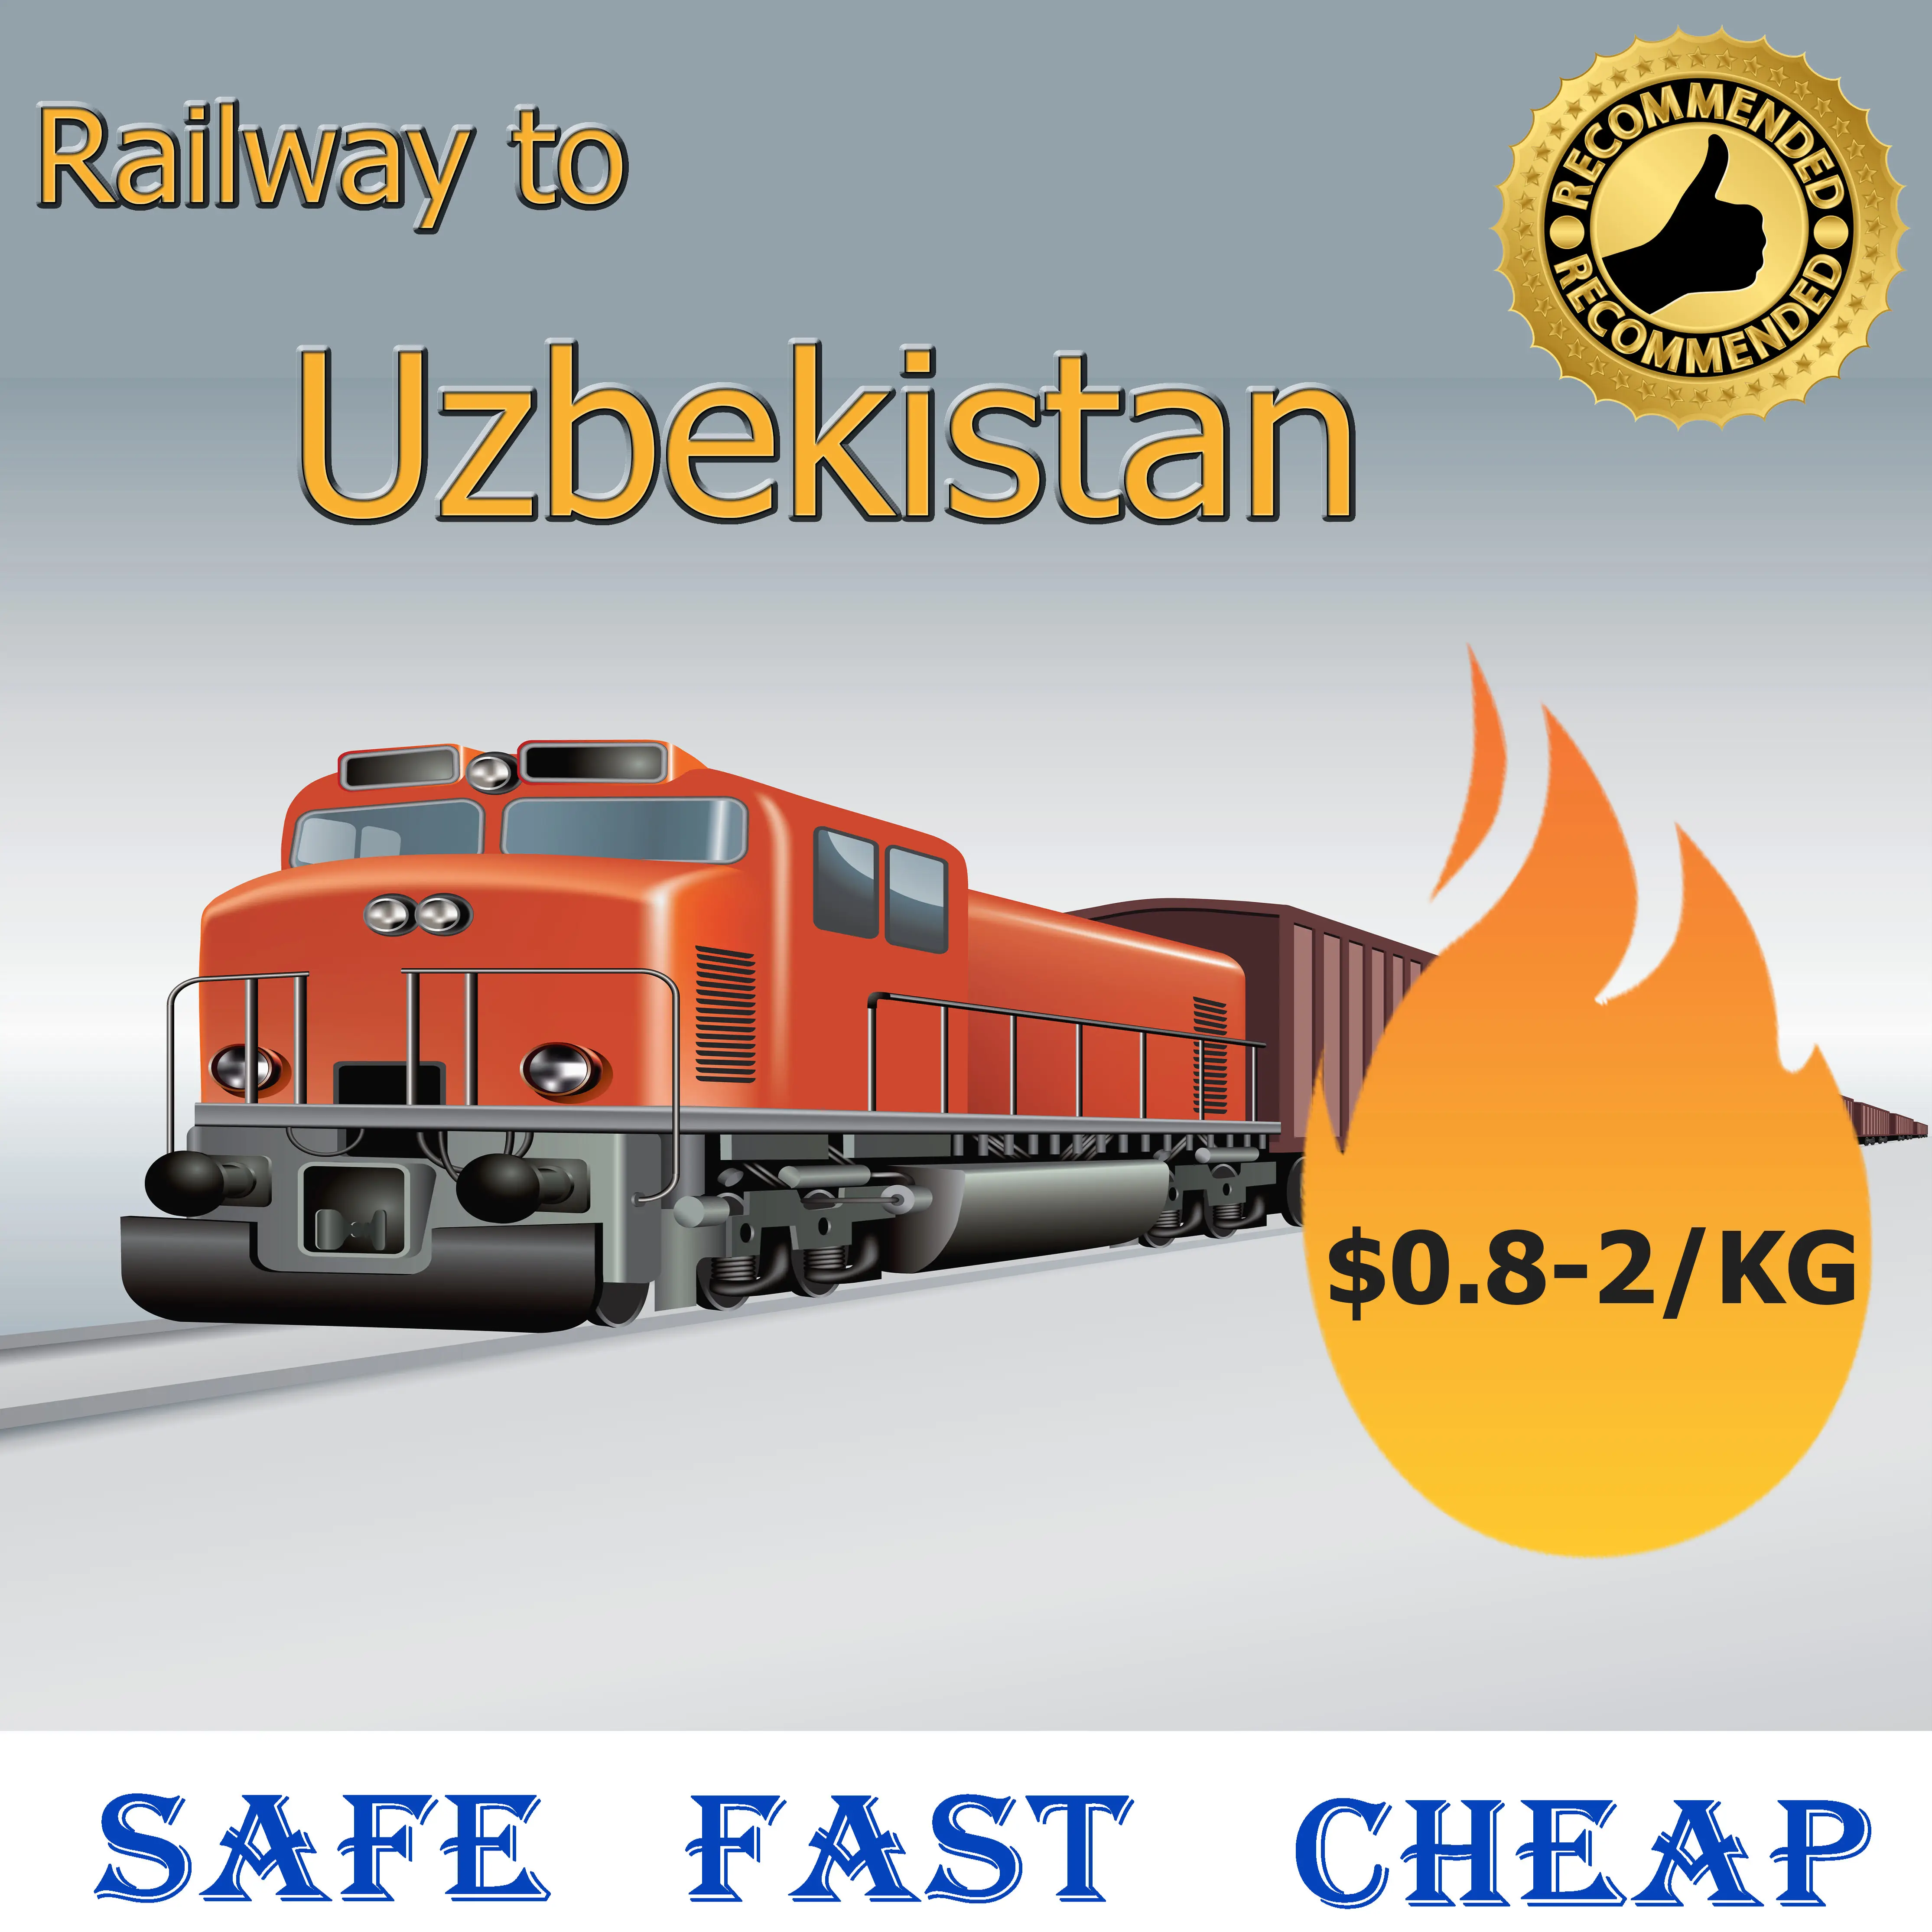 The cheapest price from china to Russia DDP Railway door to door to Uzbekistan